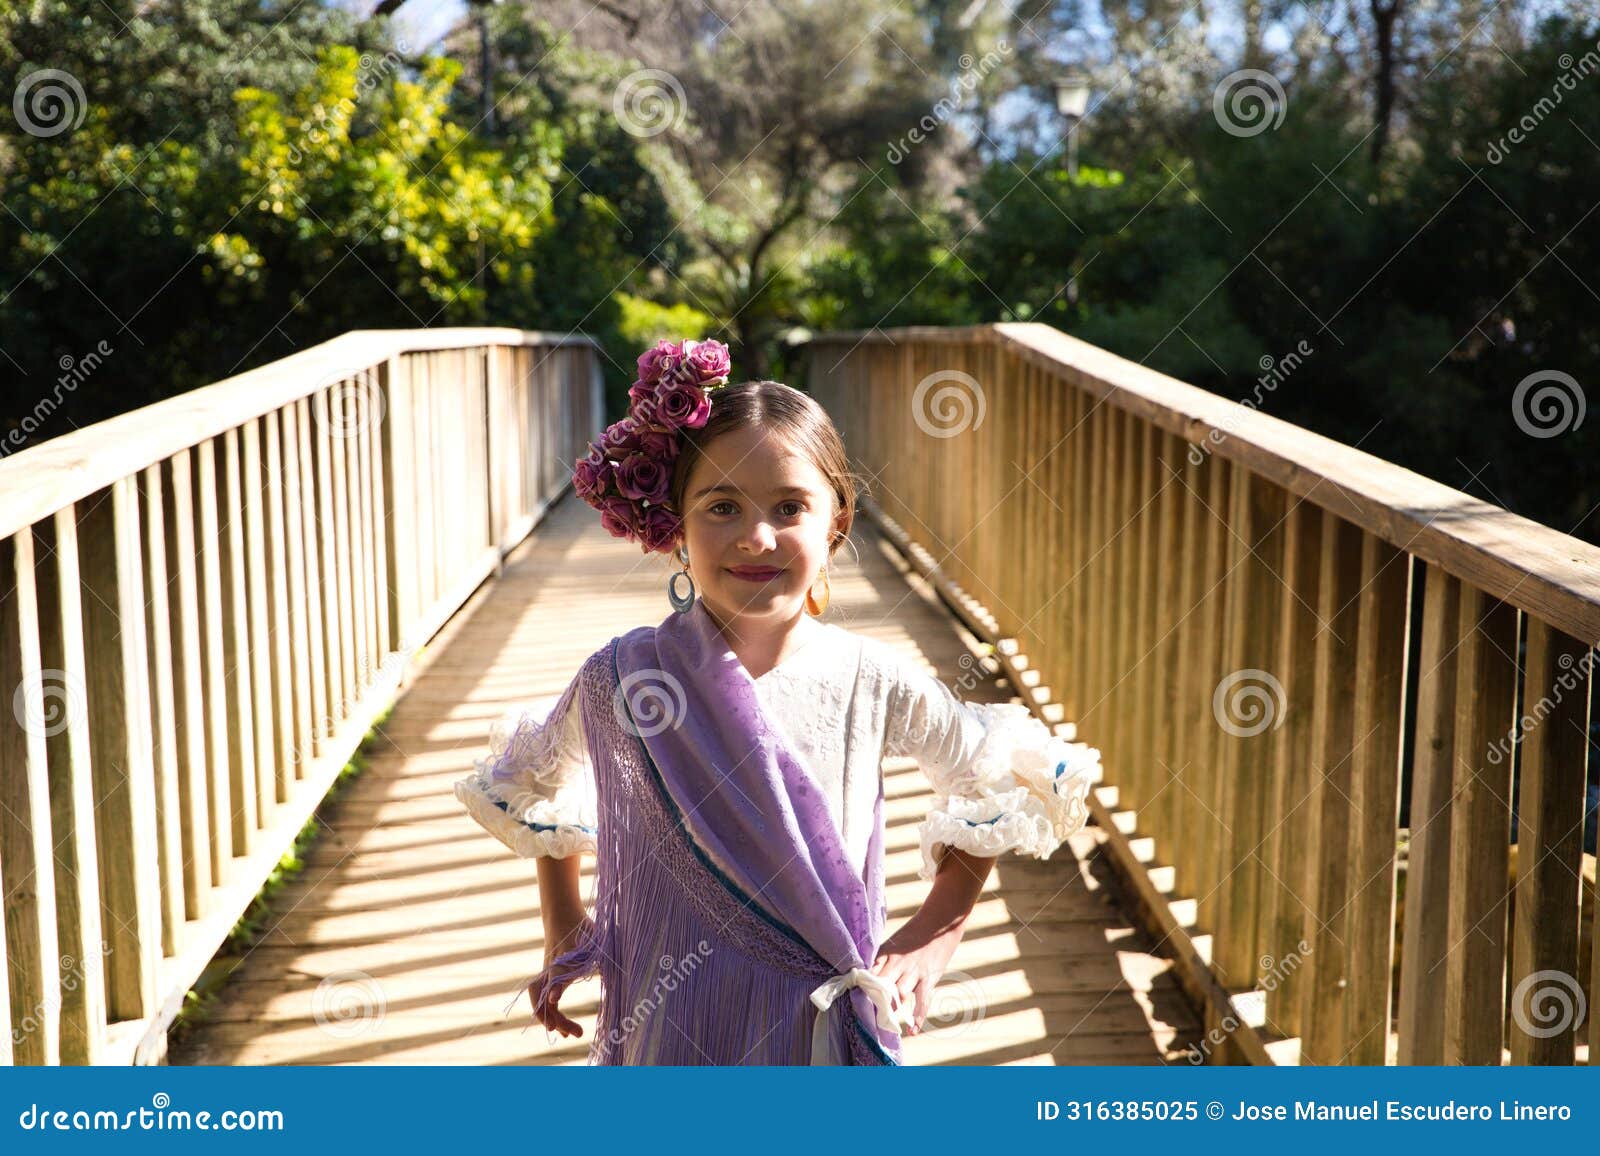 portrait of a pretty girl dancing flamenco in a dress with frills and fringes typical of gypsies, walking on a wooden bridge in a